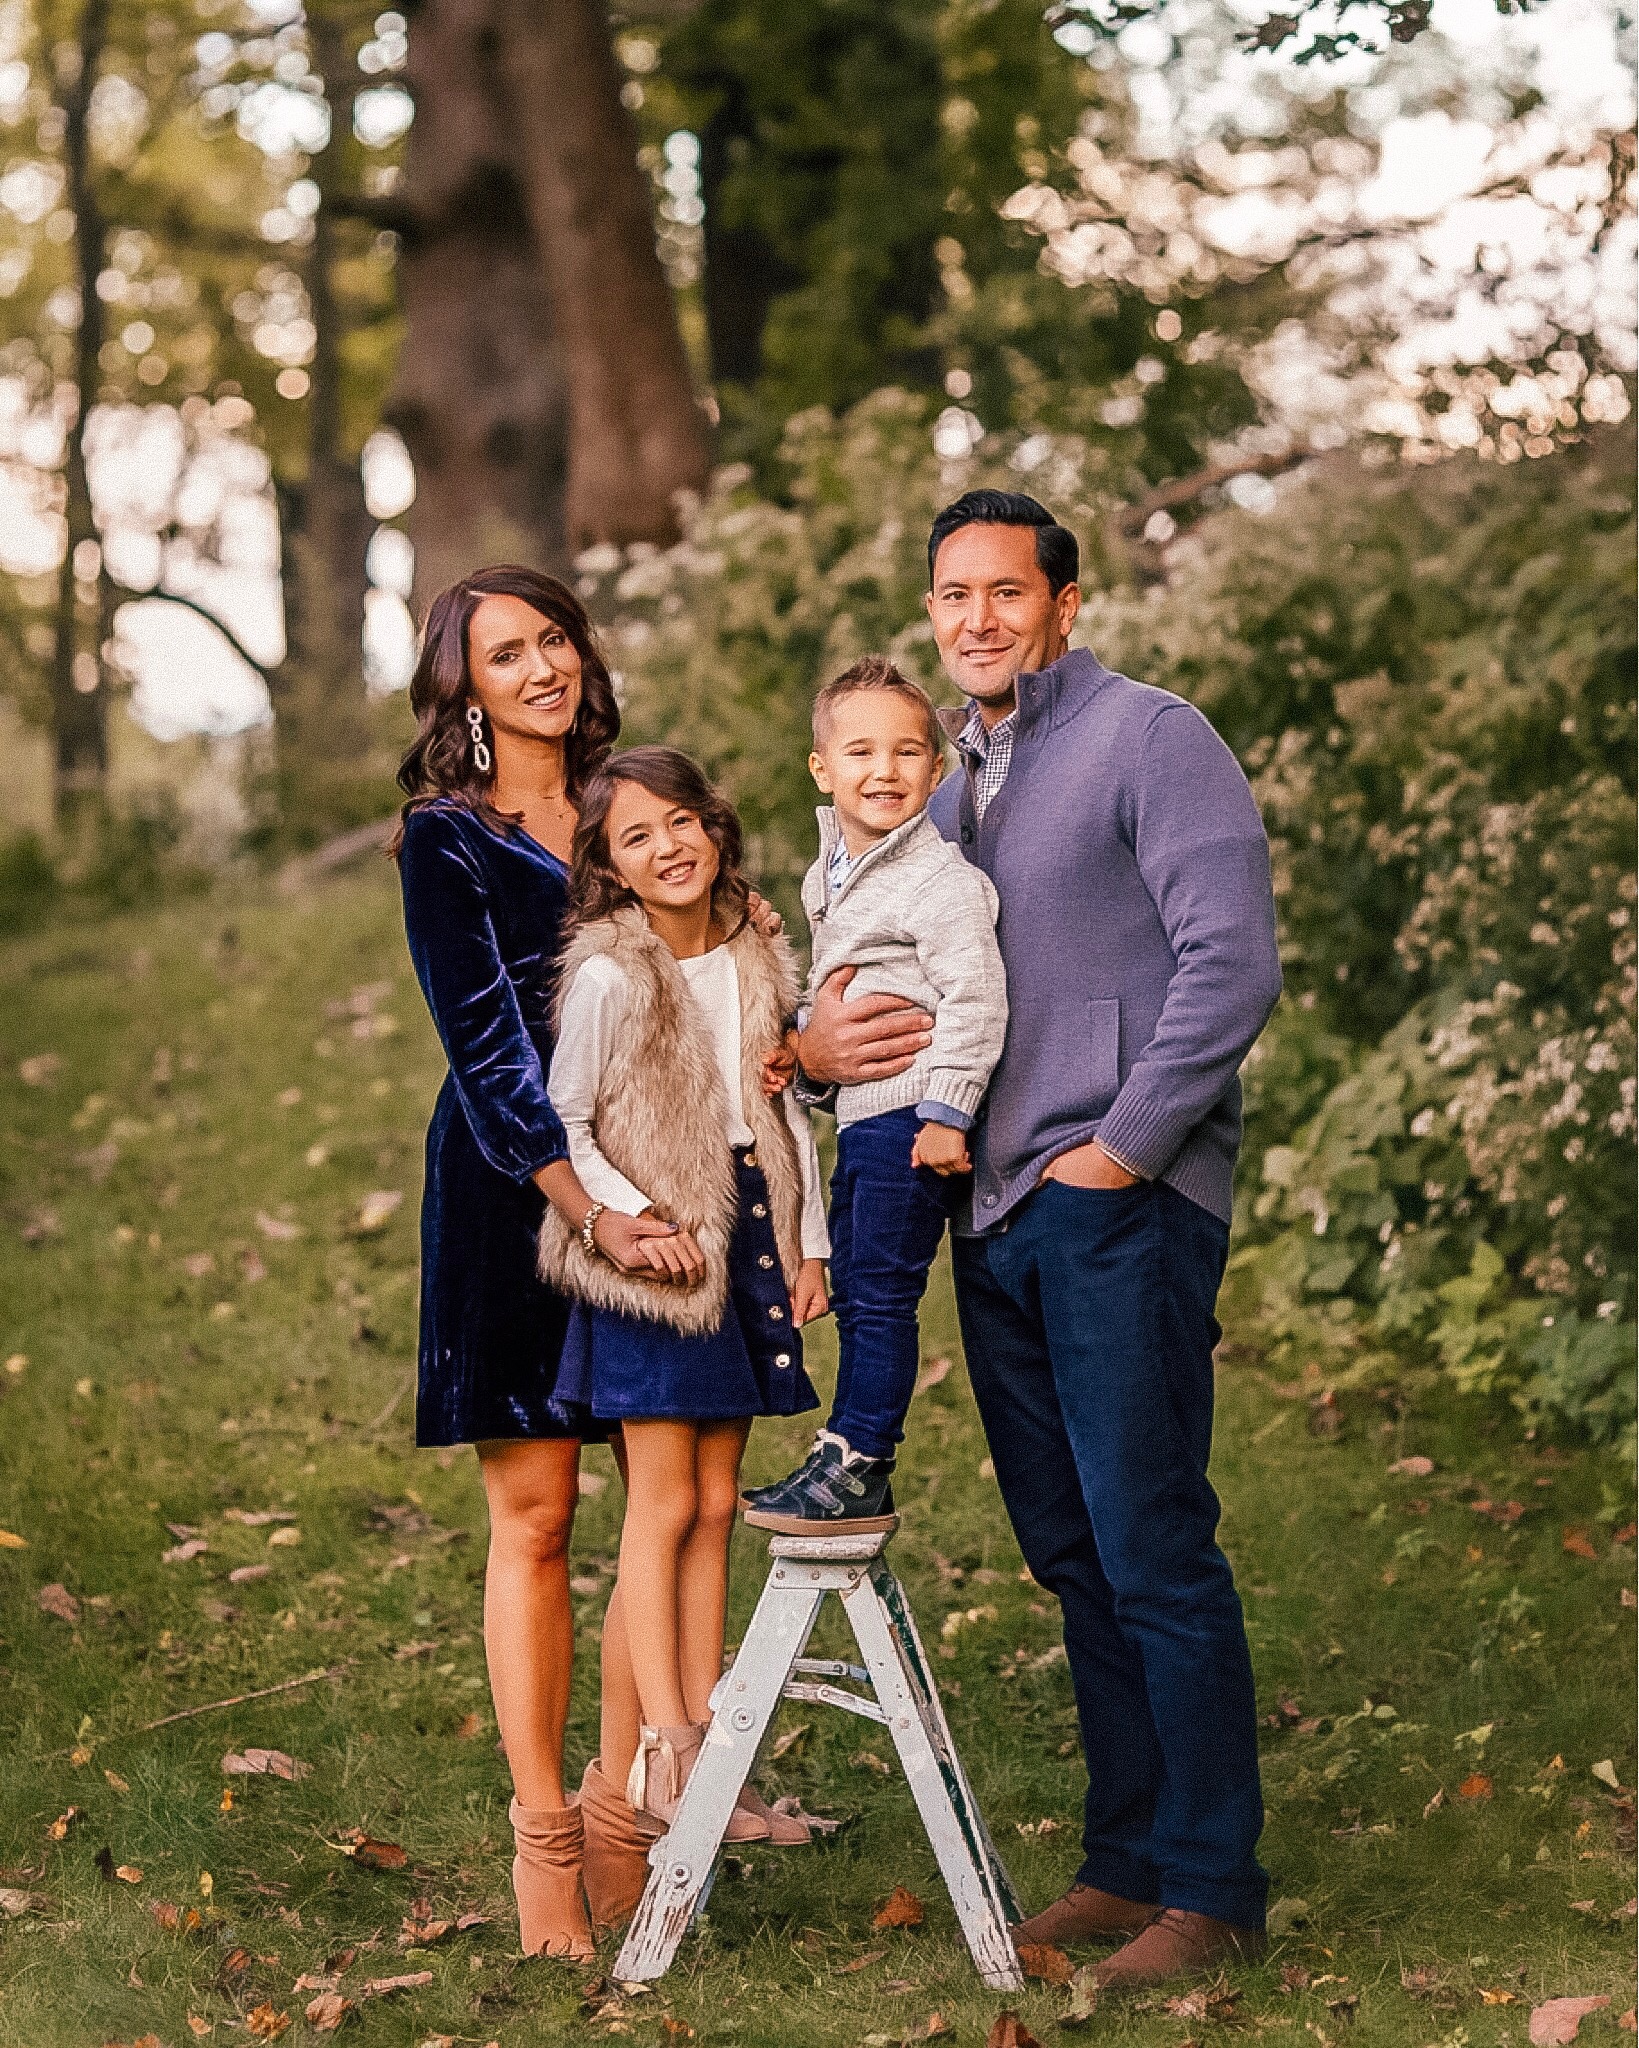 Fall Family Pictures – Outfit Ideas